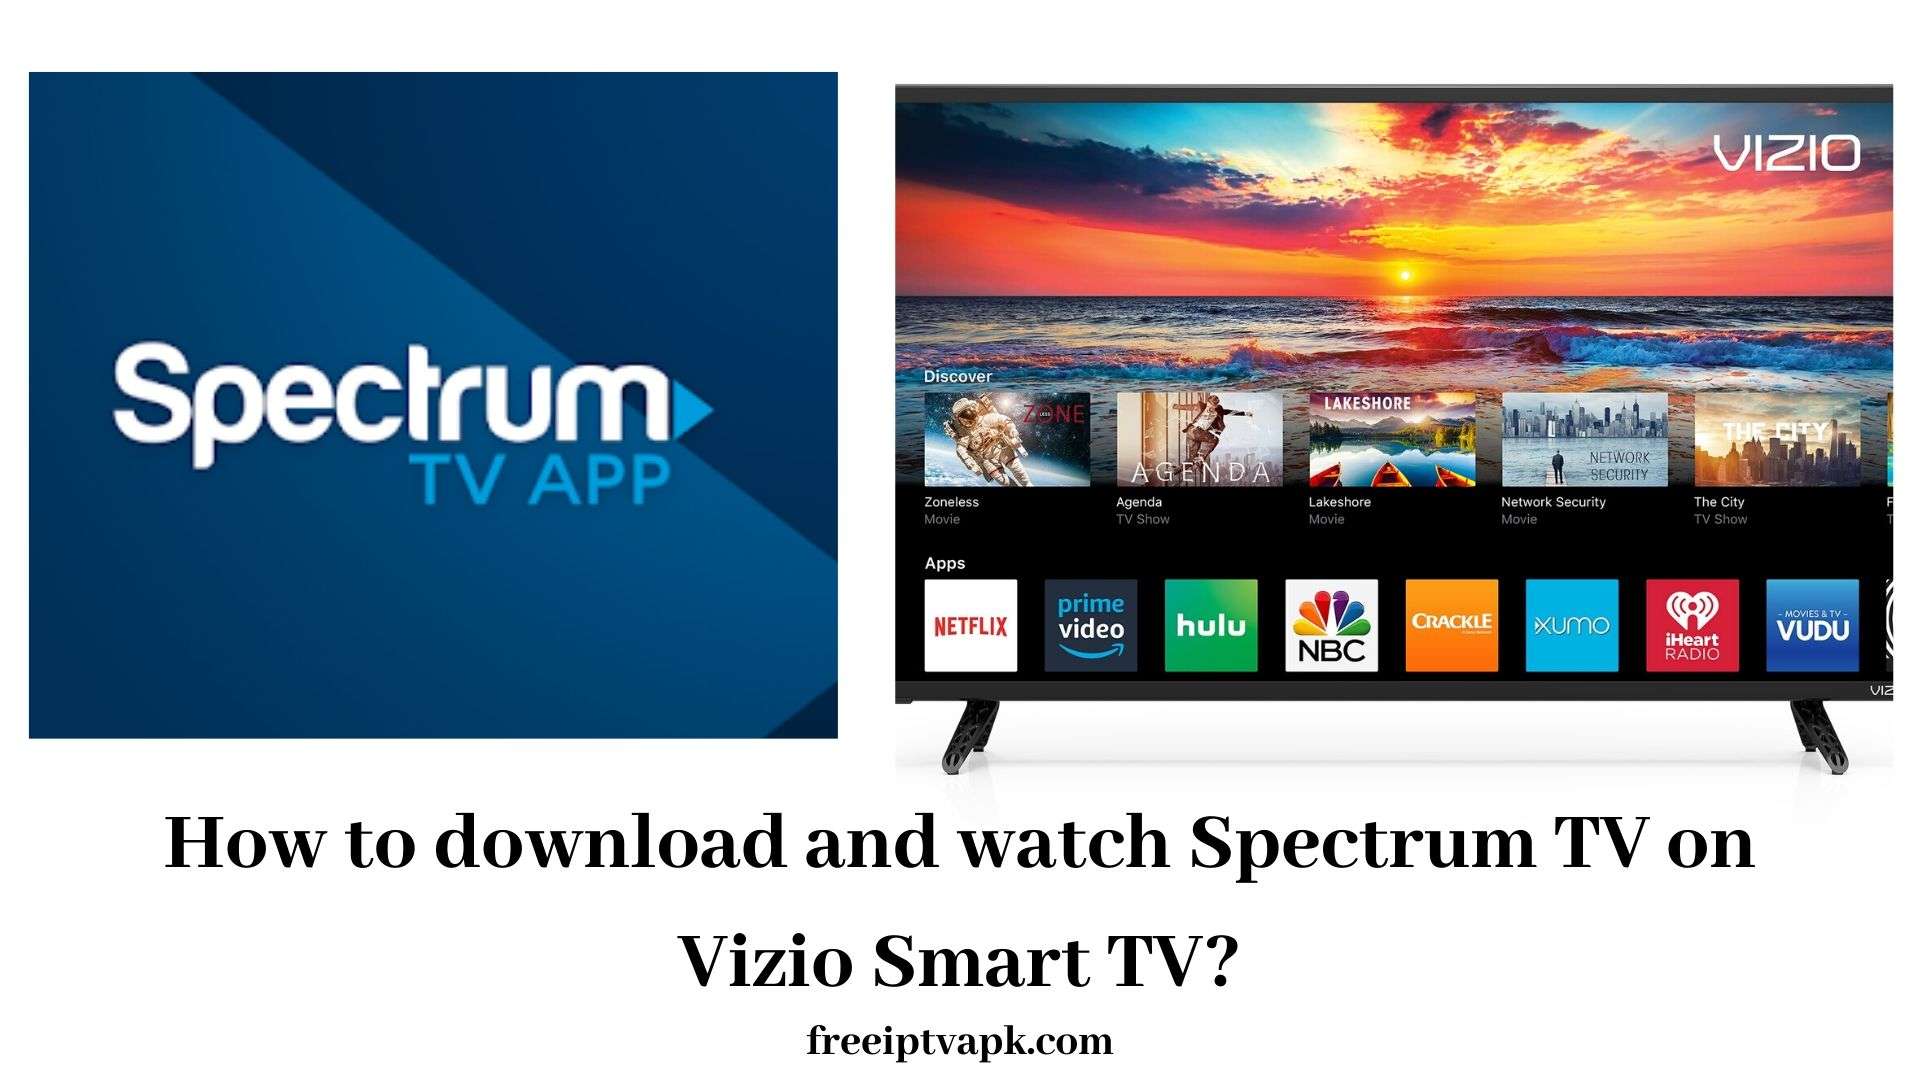 How to download and watch Spectrum TV on Vizio Smart TV?